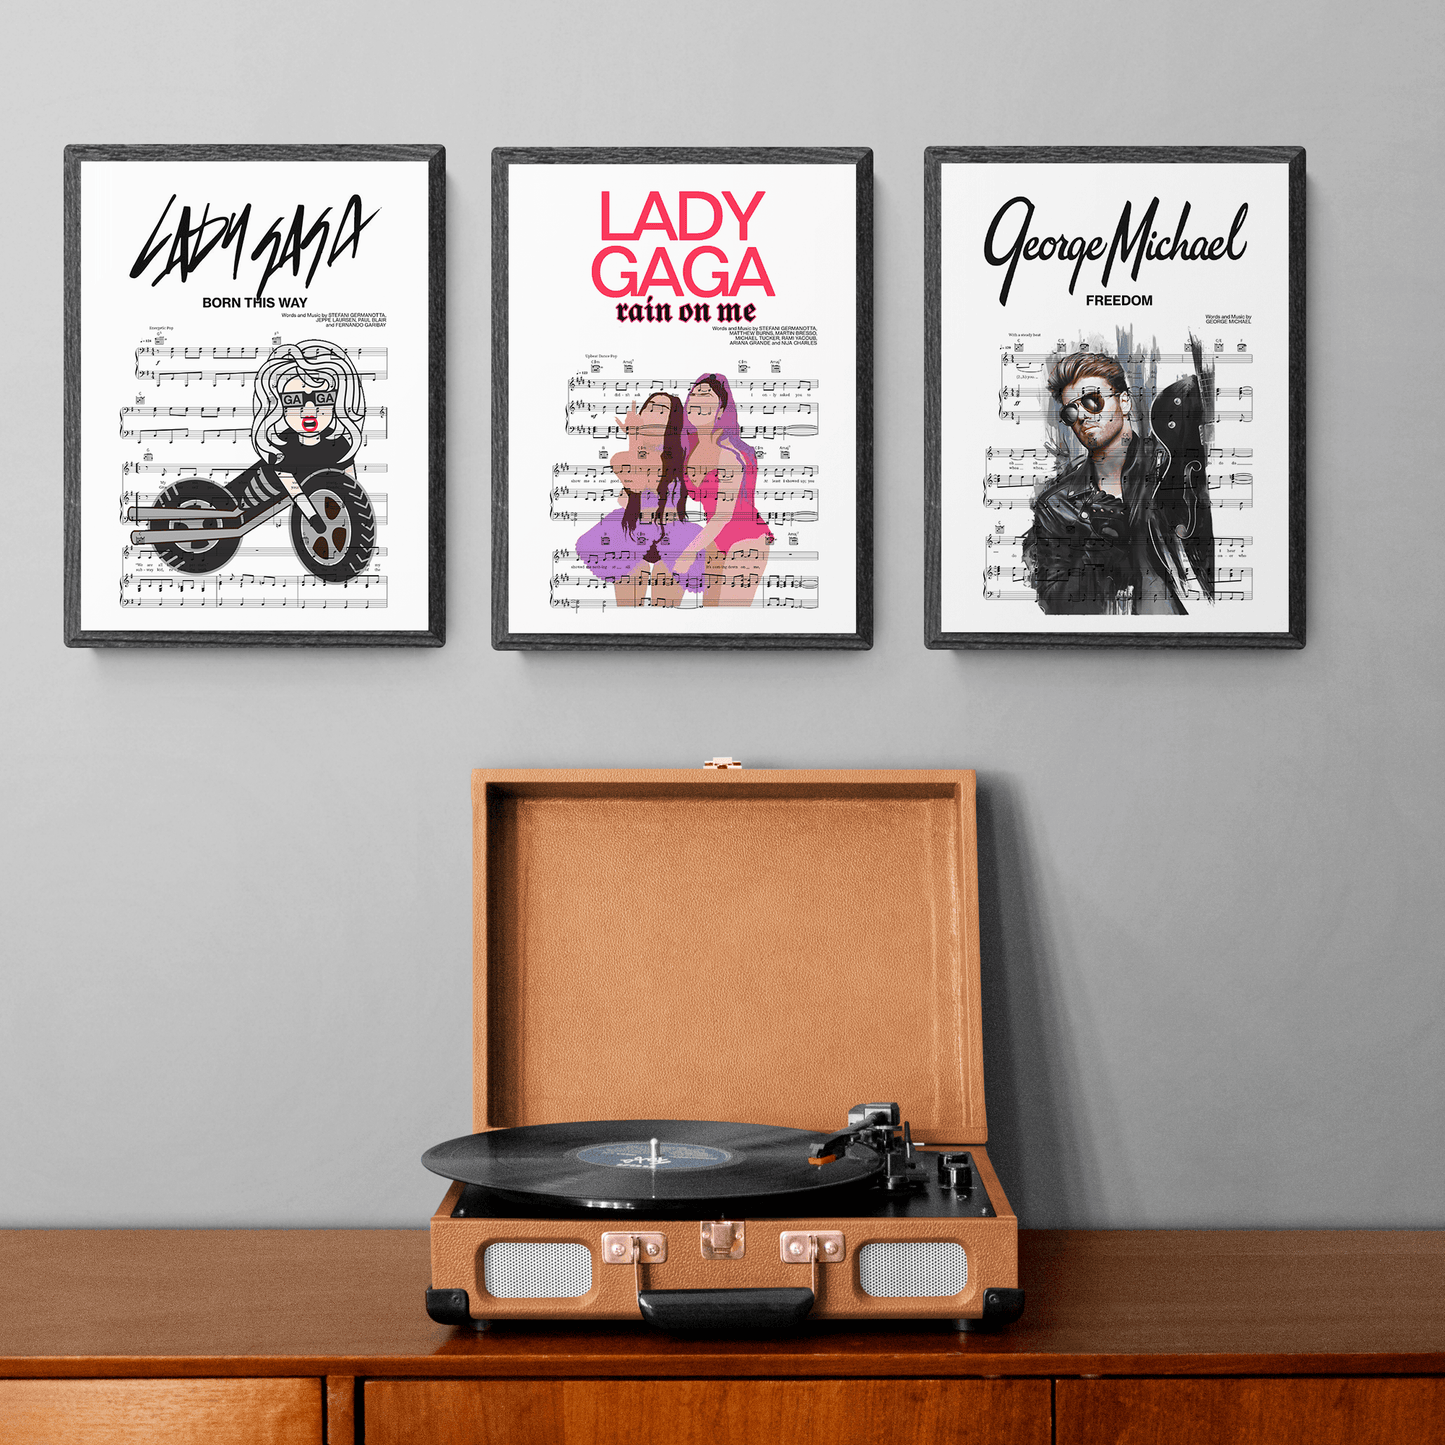 This stylish poster will make a statement in any room. Its heavyweight paper, archival ink, and semi-gloss finish ensure superior print quality and vivid, long-lasting colors. Enhance any gallery wall with this eye-catching piece and combine with other prints for a vibrant, cohesive look.